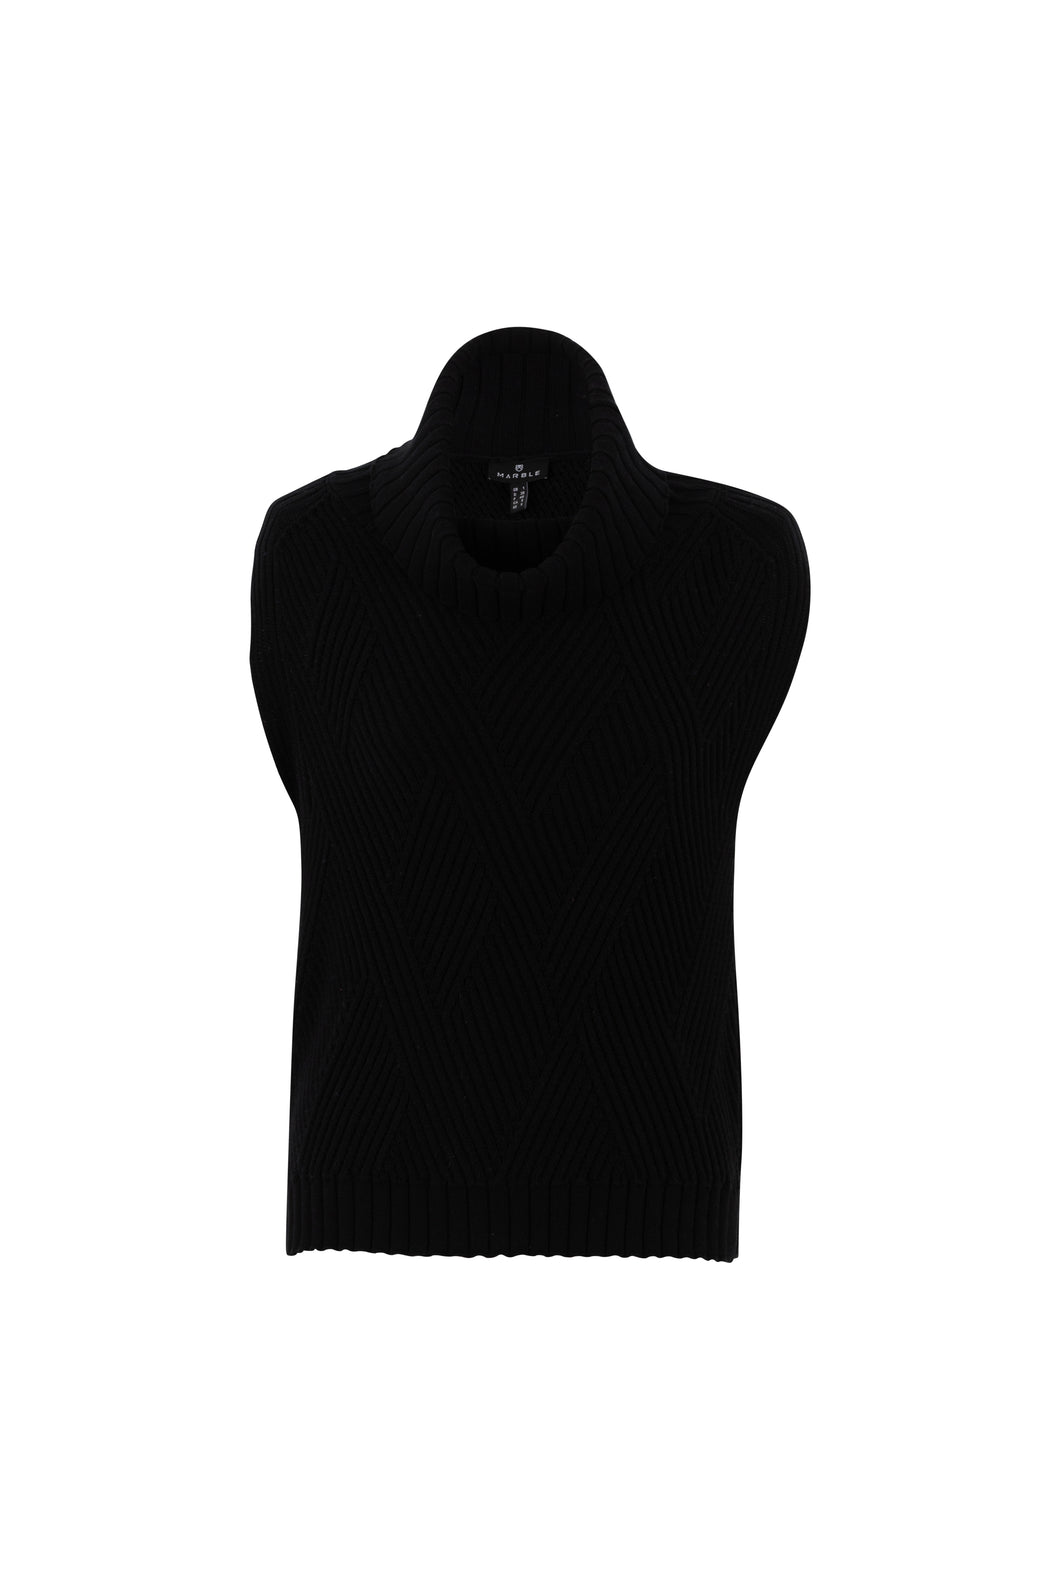 MARBLE FASHIONS 6755 SWEATER COLOUR 101 - BLACK